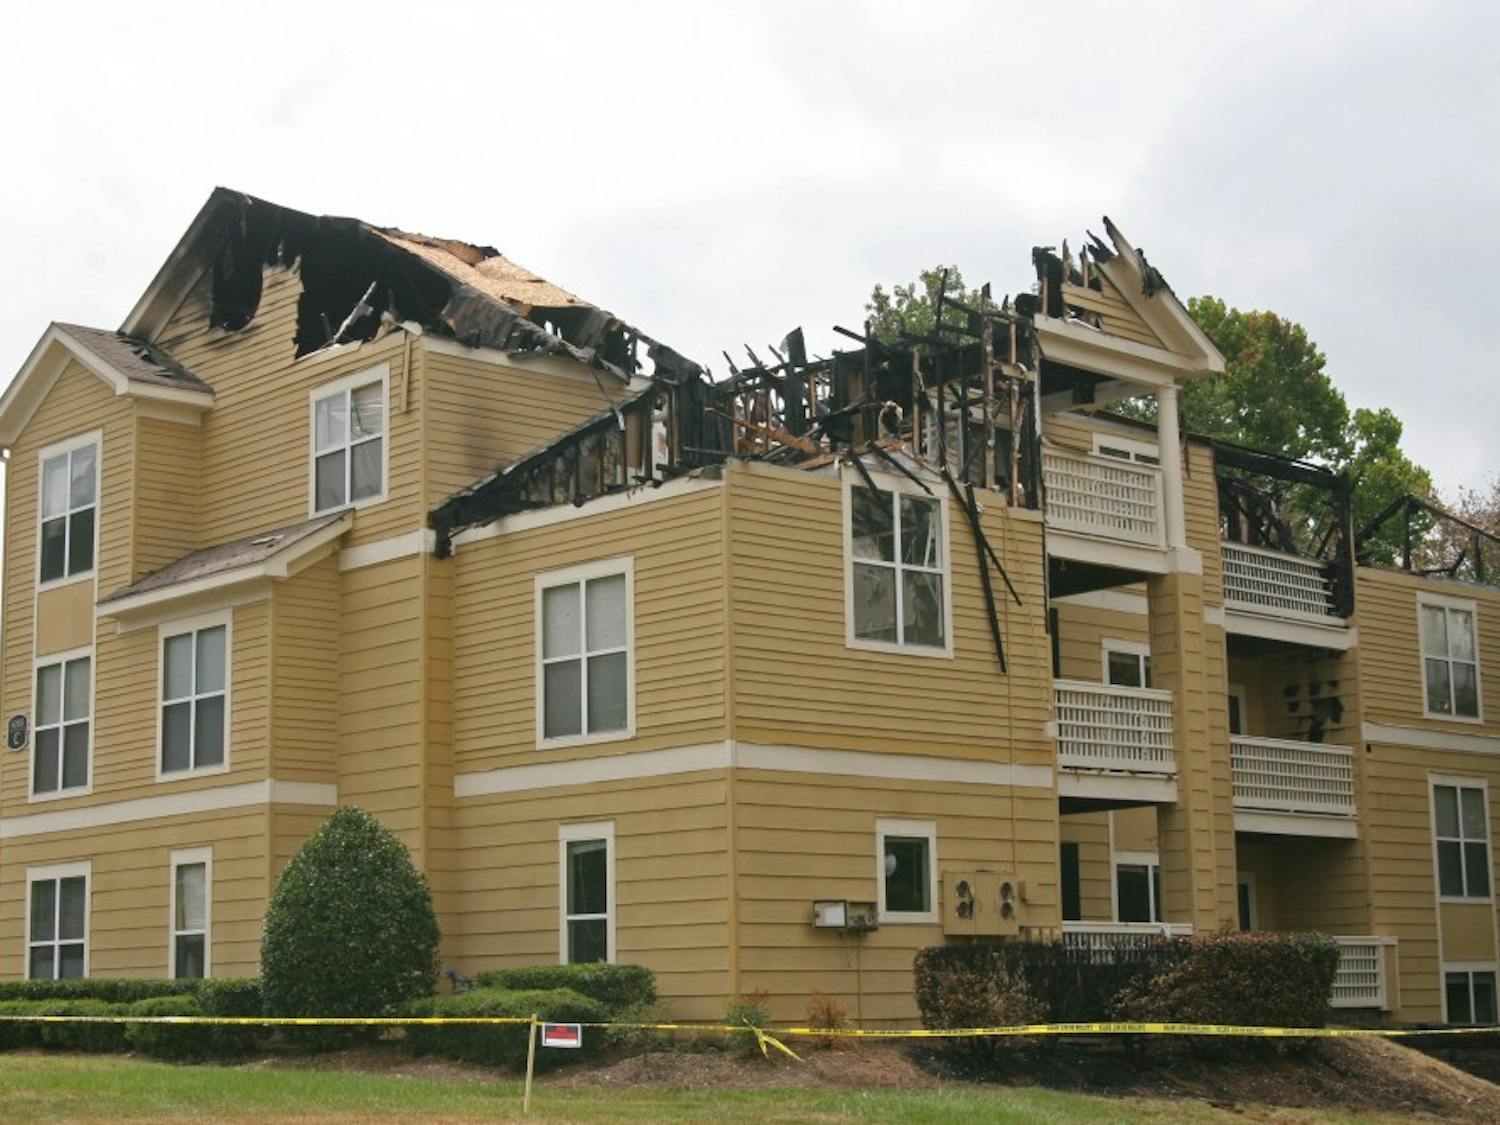 A fire at Farrignton Lake Apartments Saturday caused $1.3 million in damage. Two UNC football players were among those displaced.